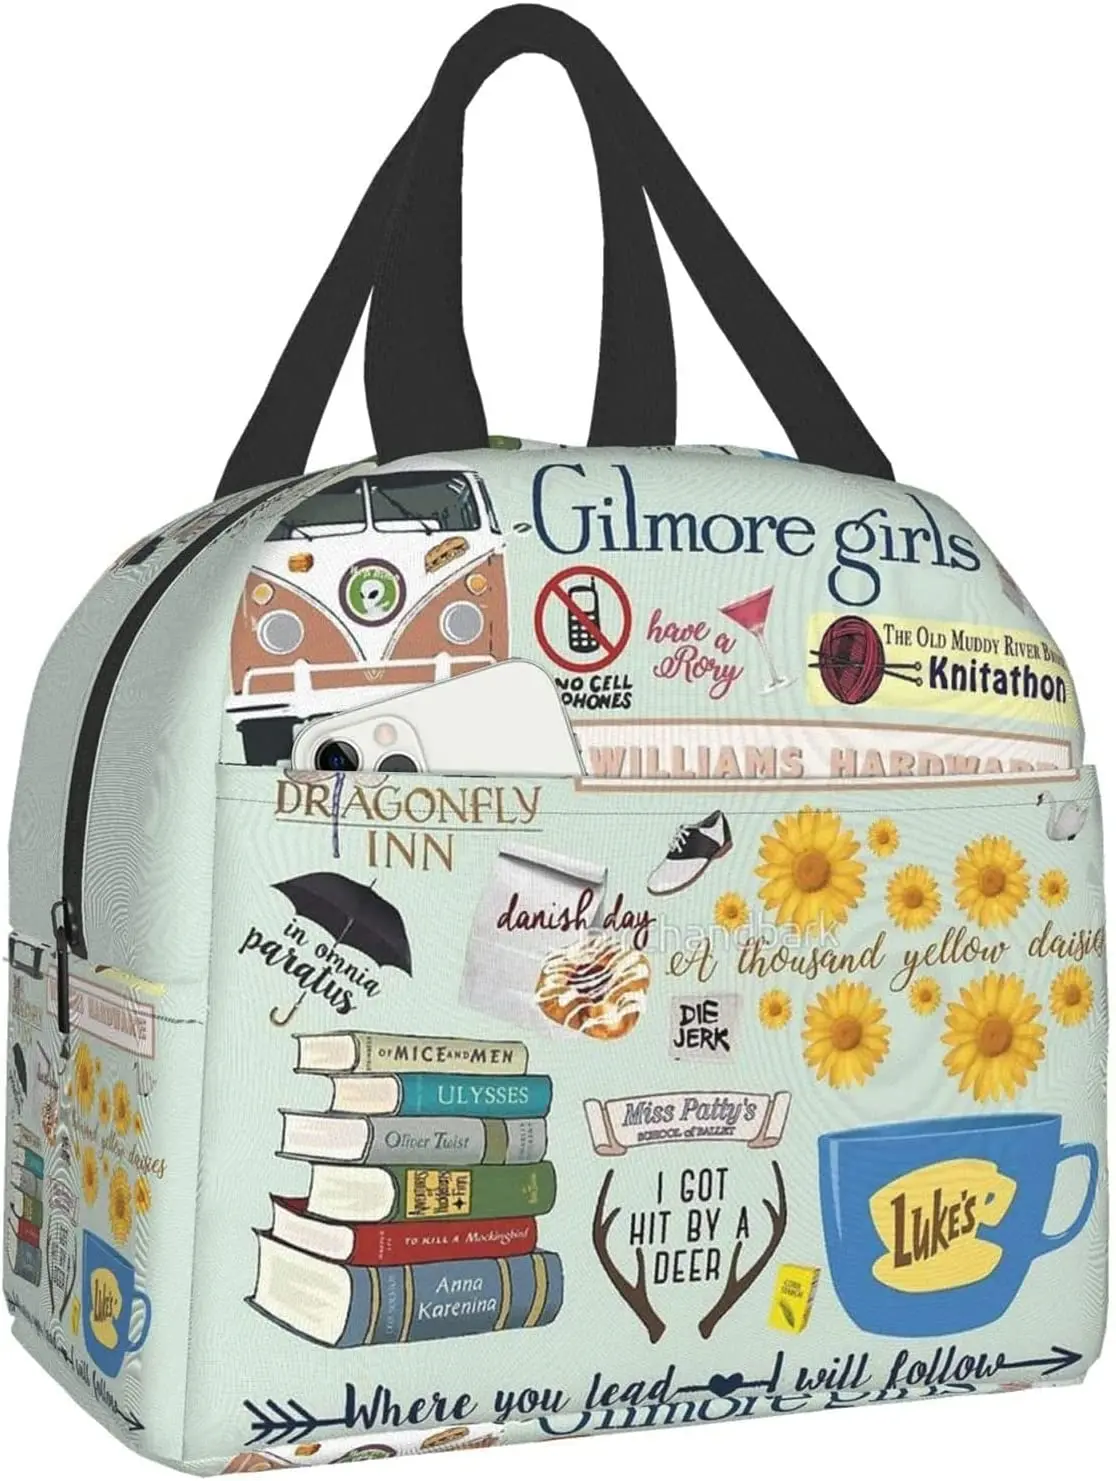 https://ae01.alicdn.com/kf/S74c144b5c3014bdf95a5c13272108716U/Gilmore-Girls-Lunch-Tote-Bag-for-Women-Gifts-Fashionable-Collapsible-Simple-Modern-DIY-Bag-Large.jpg